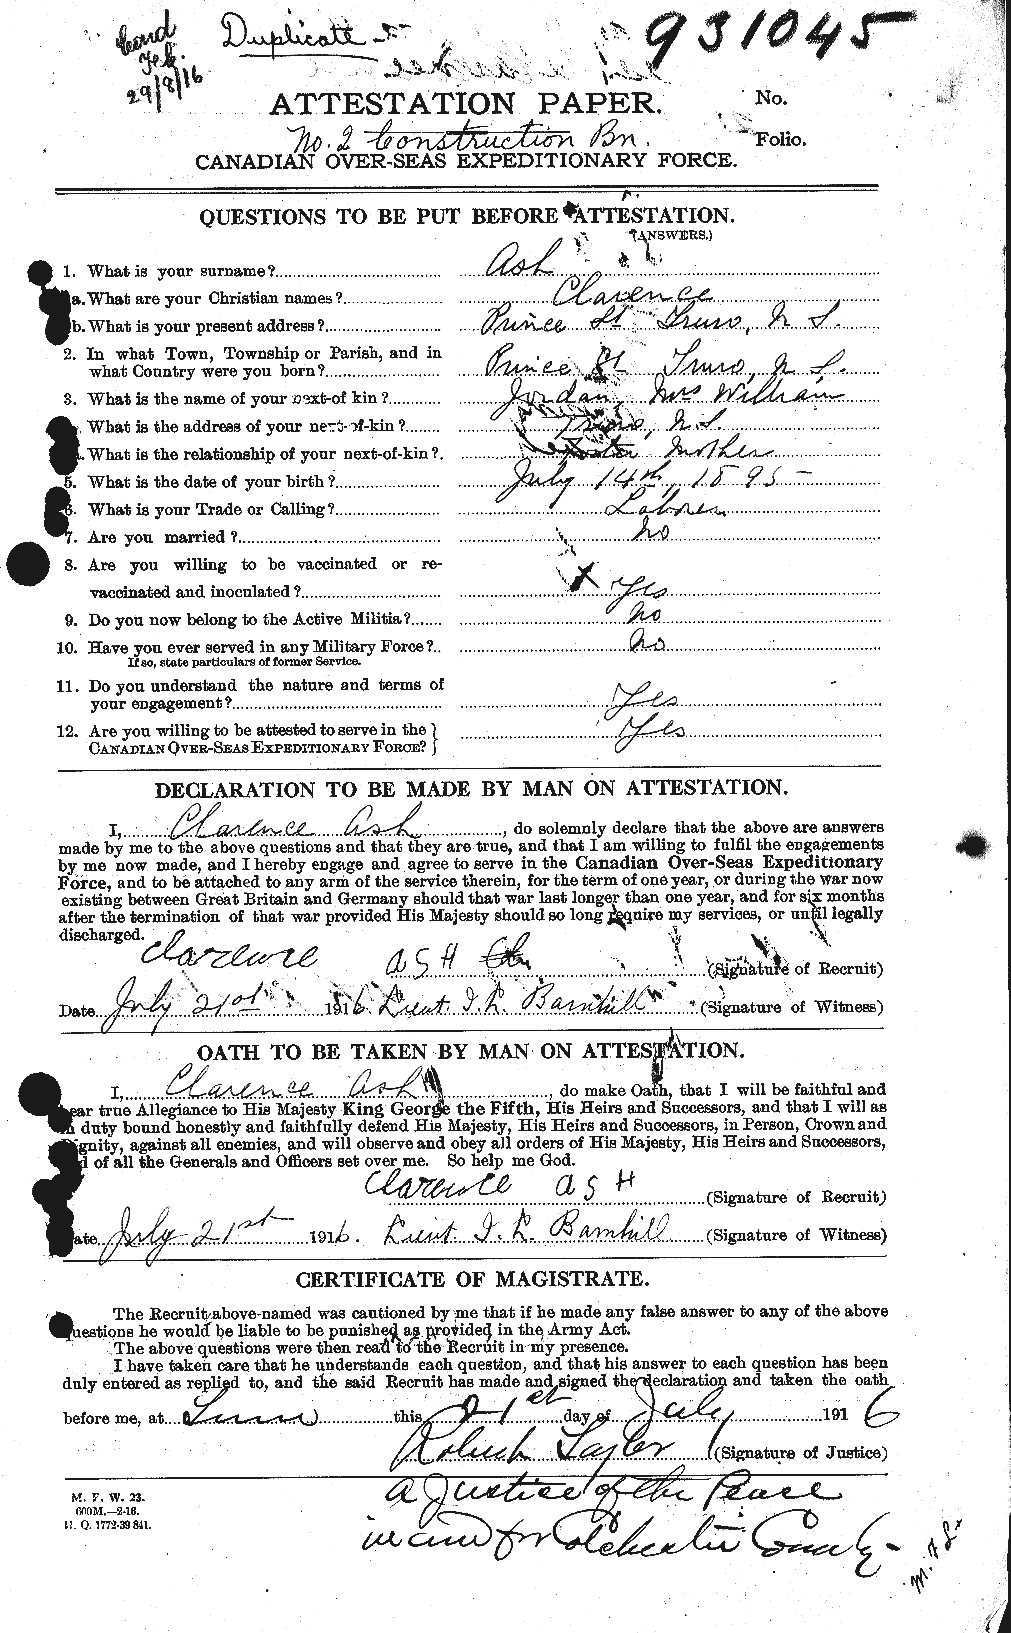 Personnel Records of the First World War - CEF 214644a